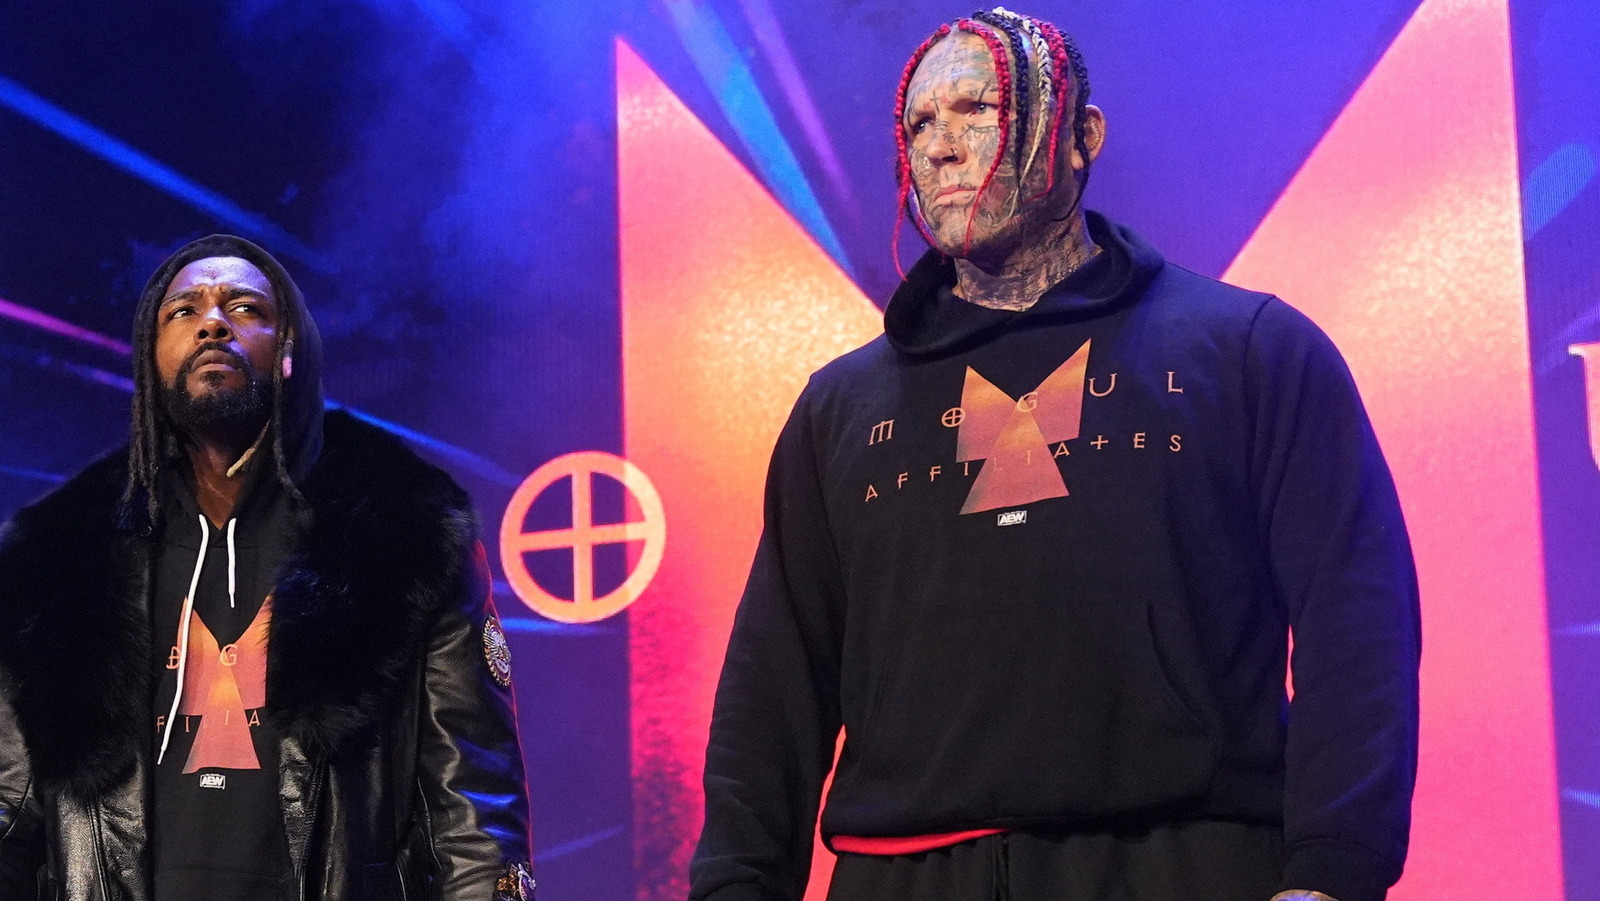 AEW Releases Trench, Former Member Of Swerve Strickland's Mogul Affiliates